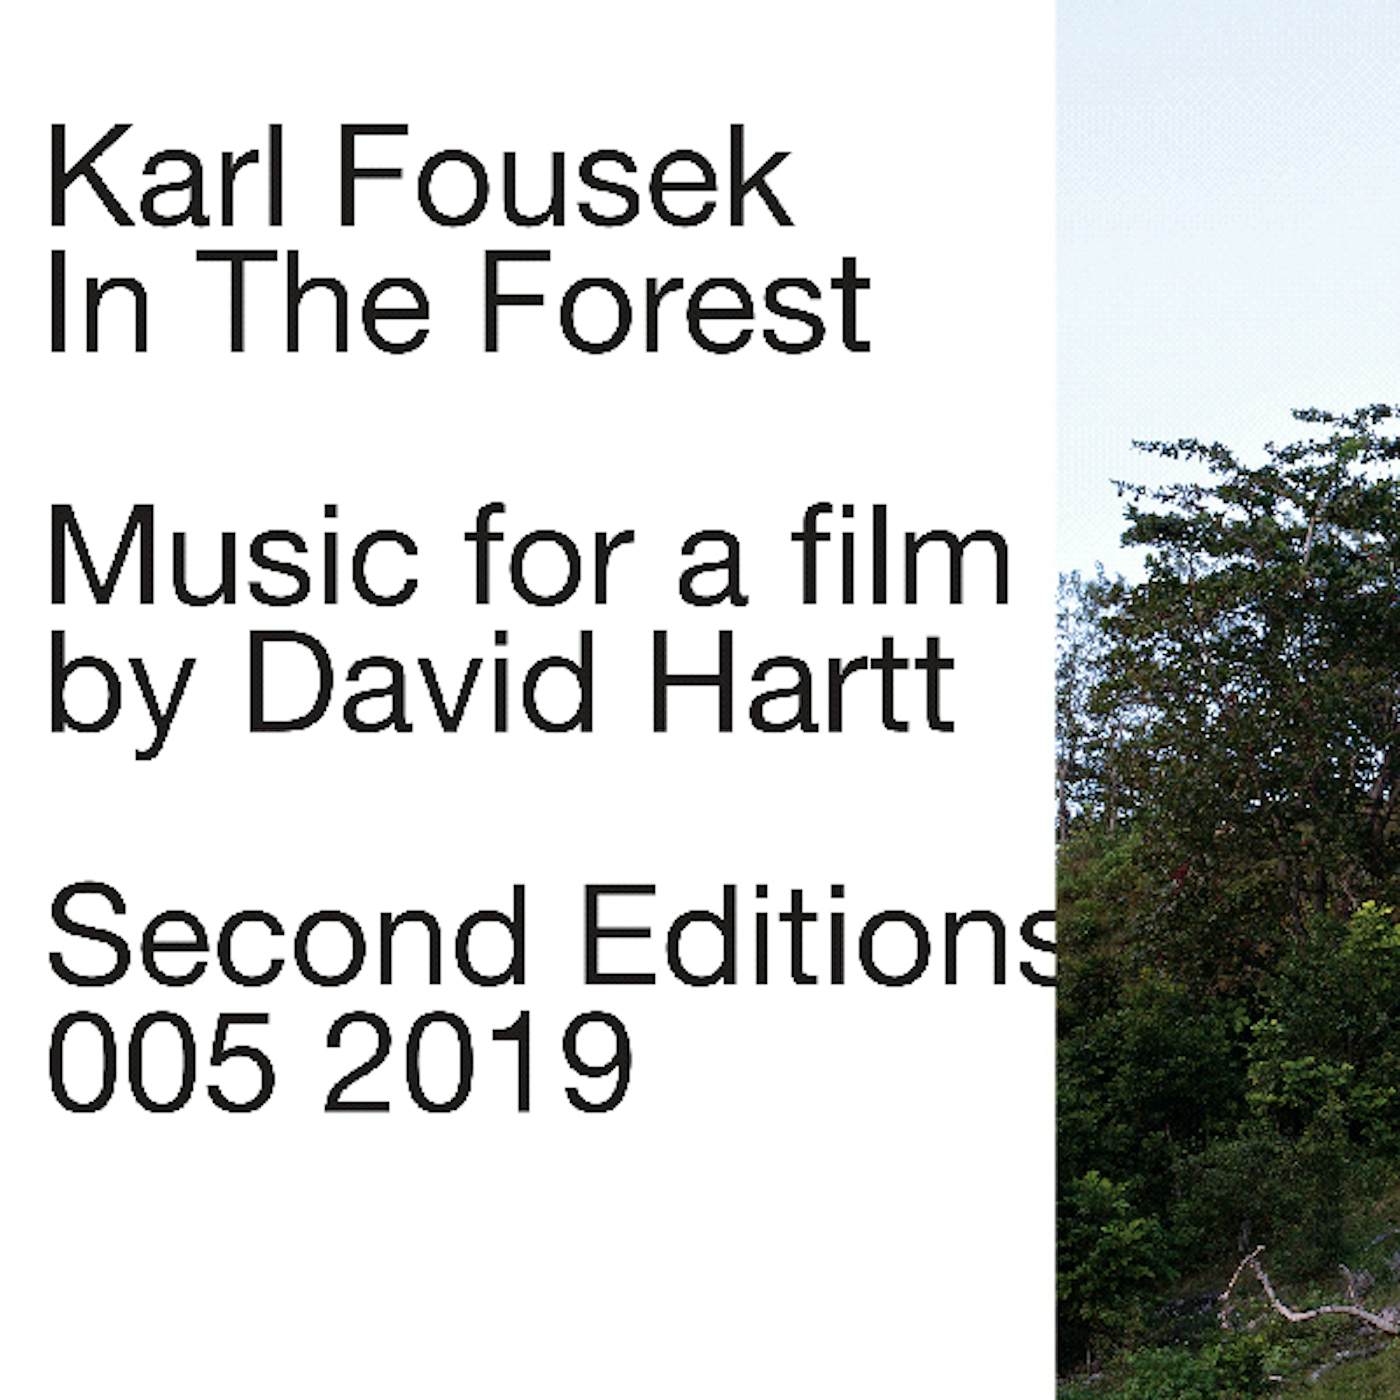 Karl Fousek In The Forest Vinyl Record